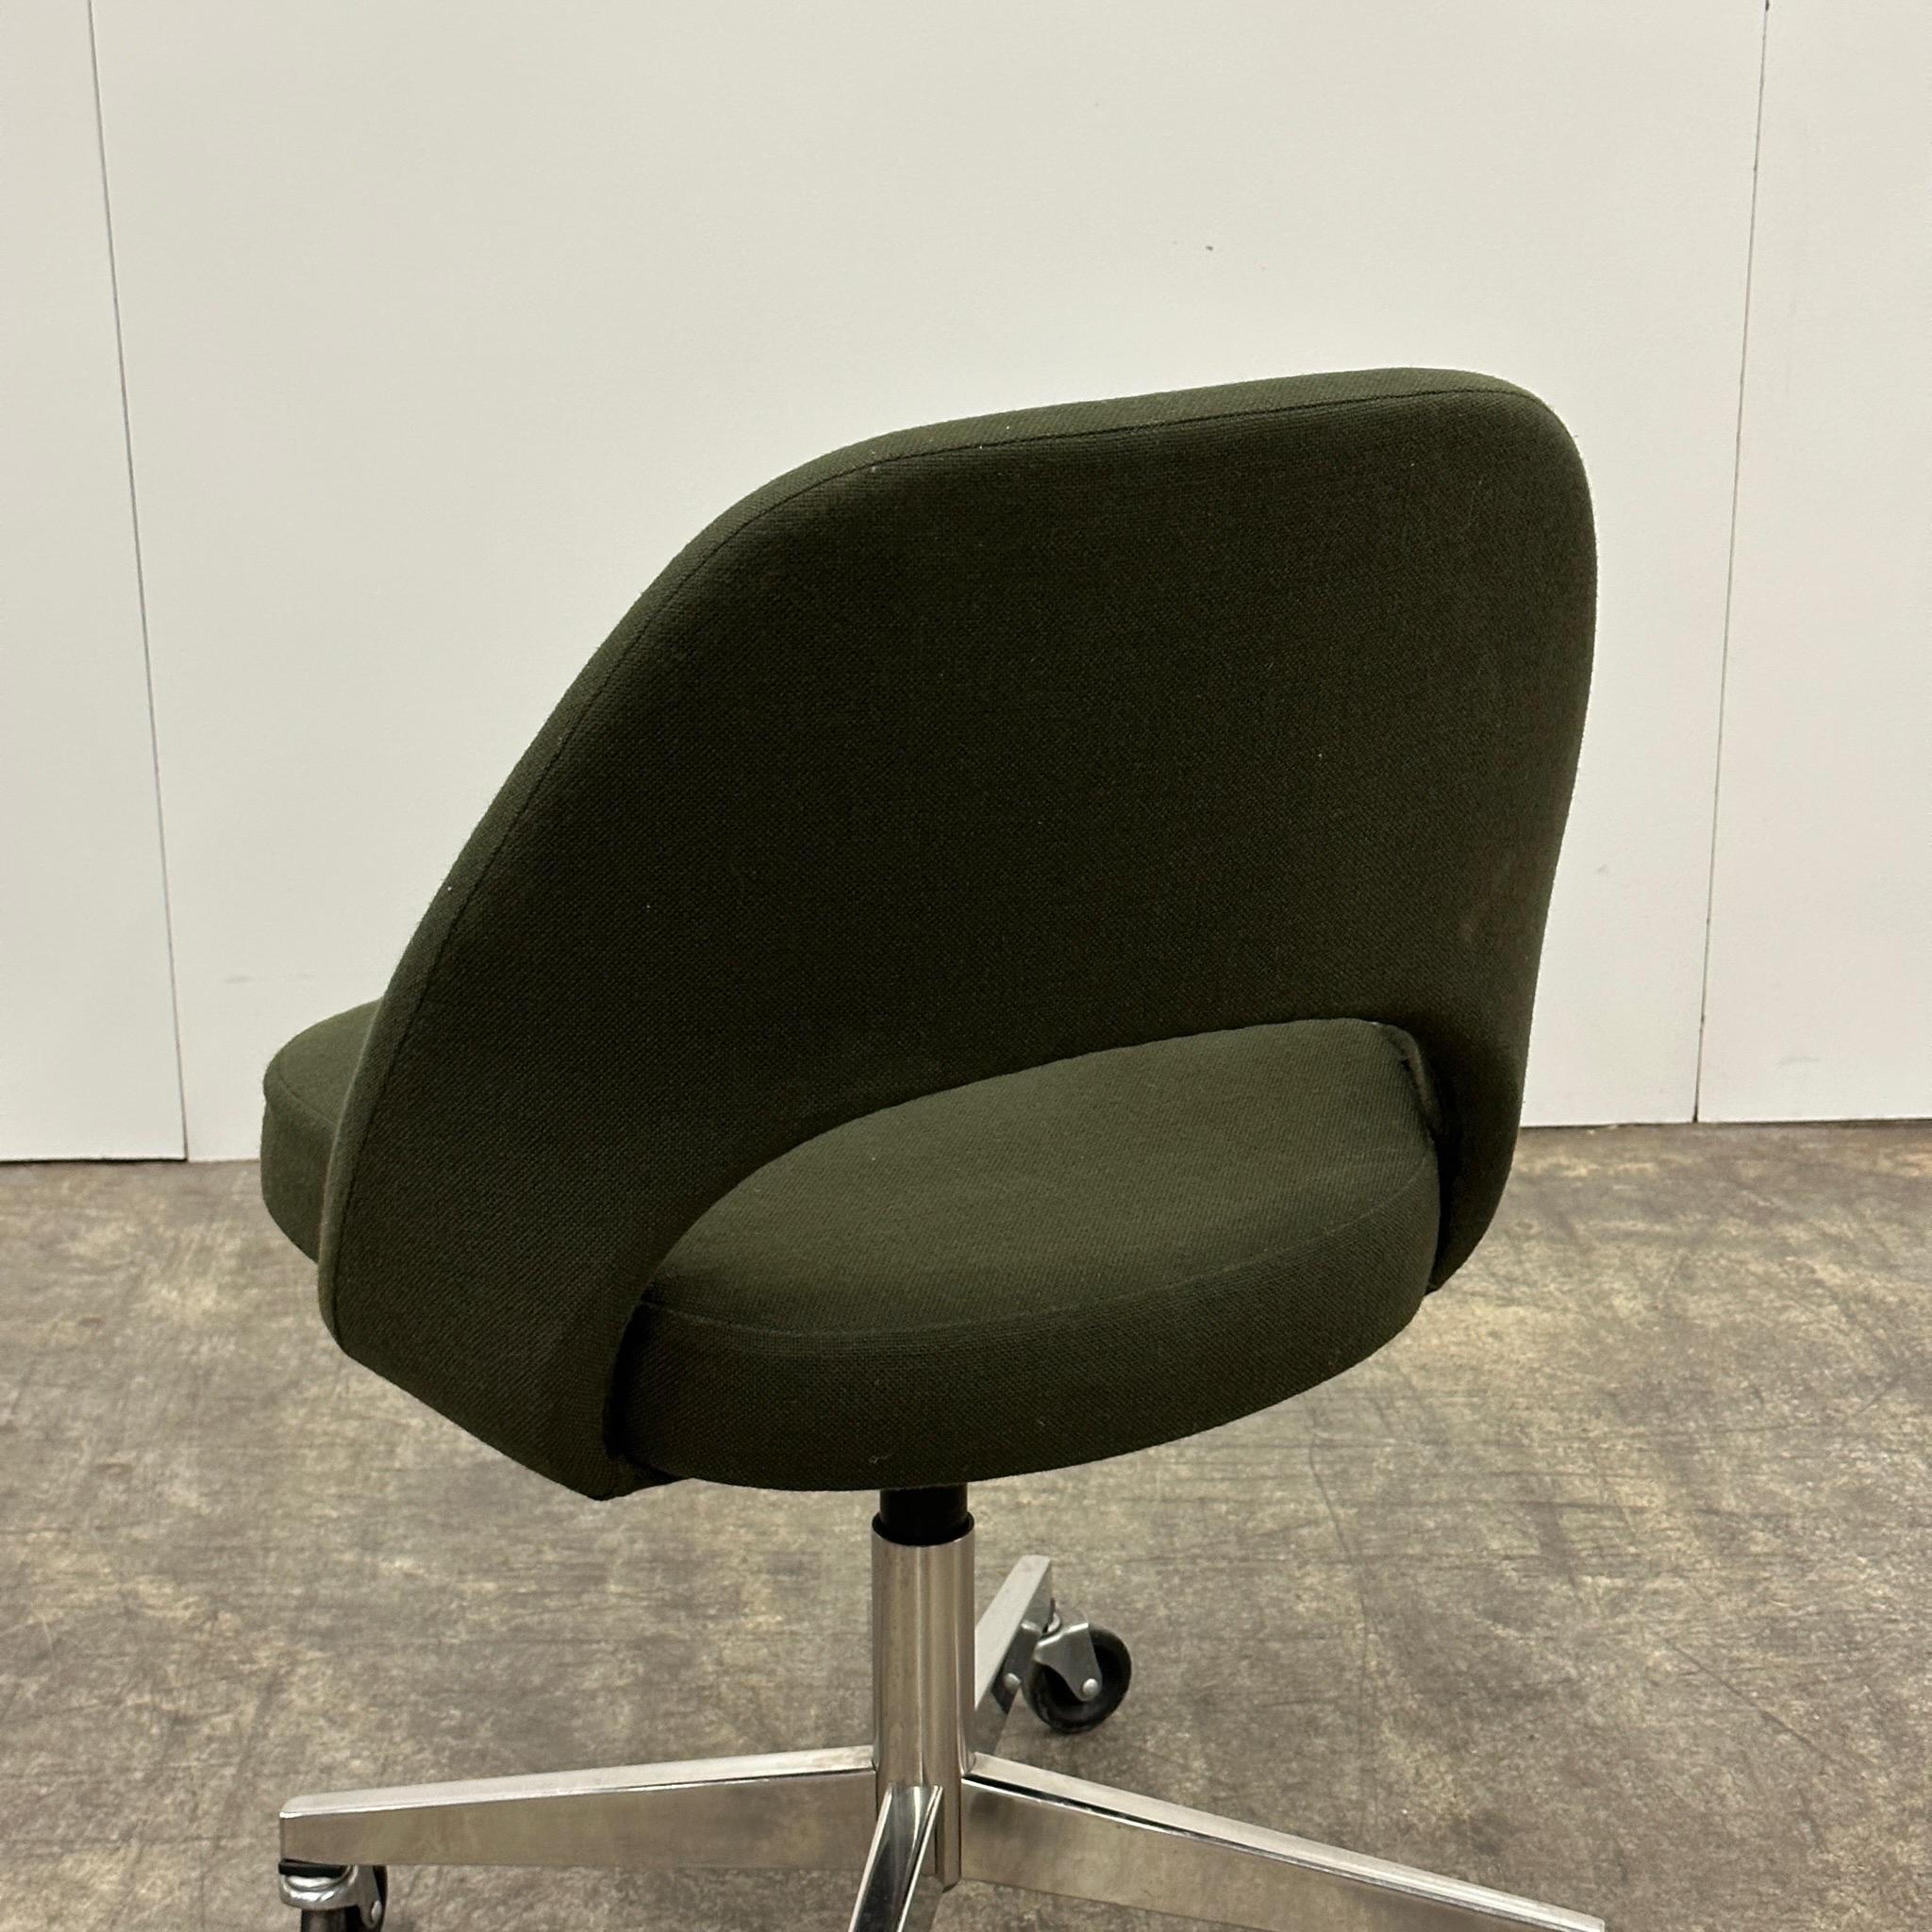 c. 1983. Upholstered in dark green wool. On vaster, height adjustable and swivels. 